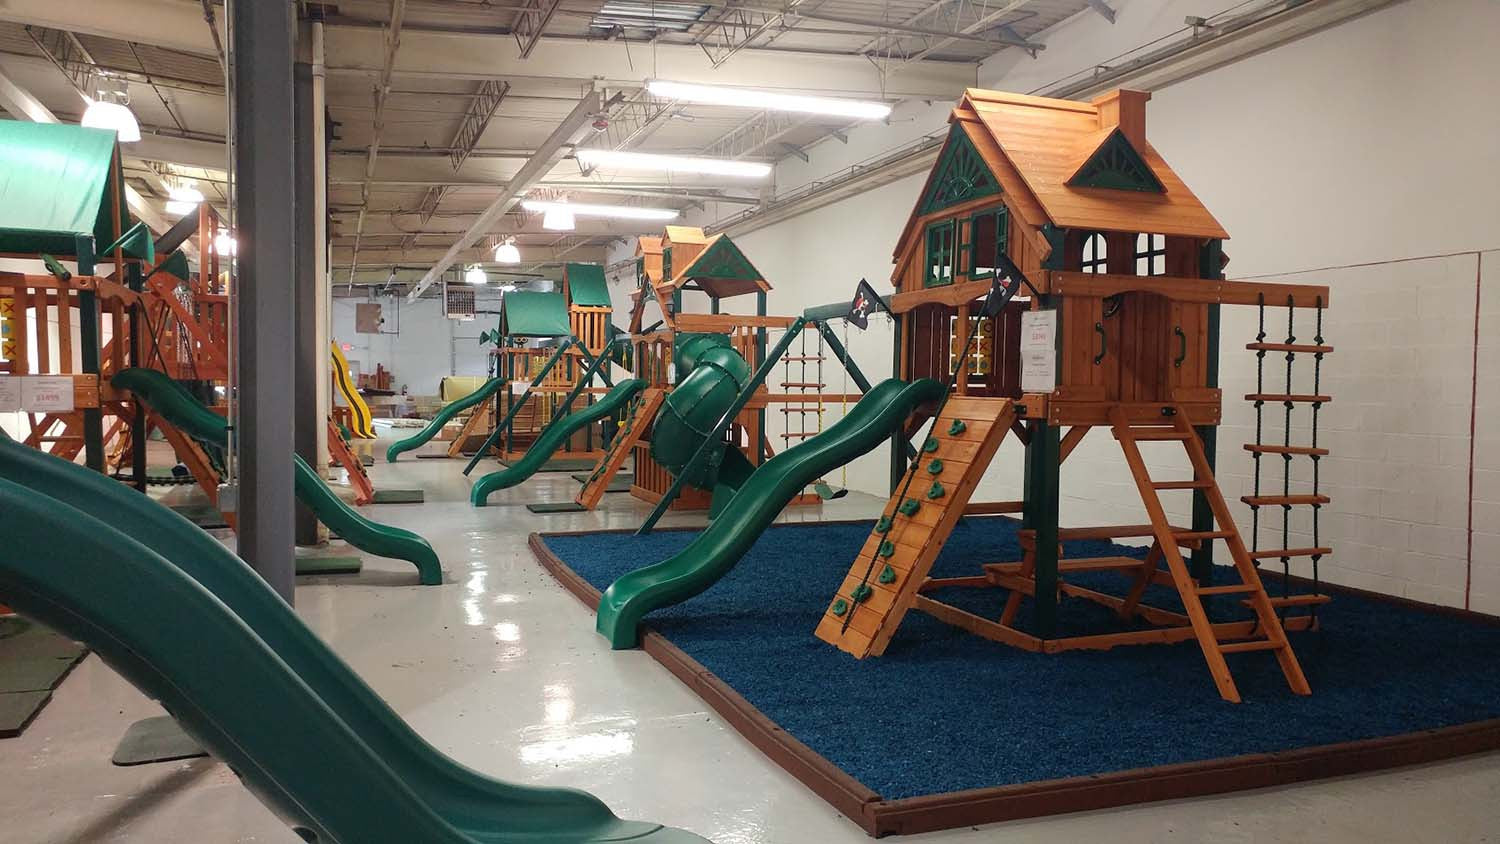 I Just Bought A Wooden Swing Set At Your Local Store - Now What?